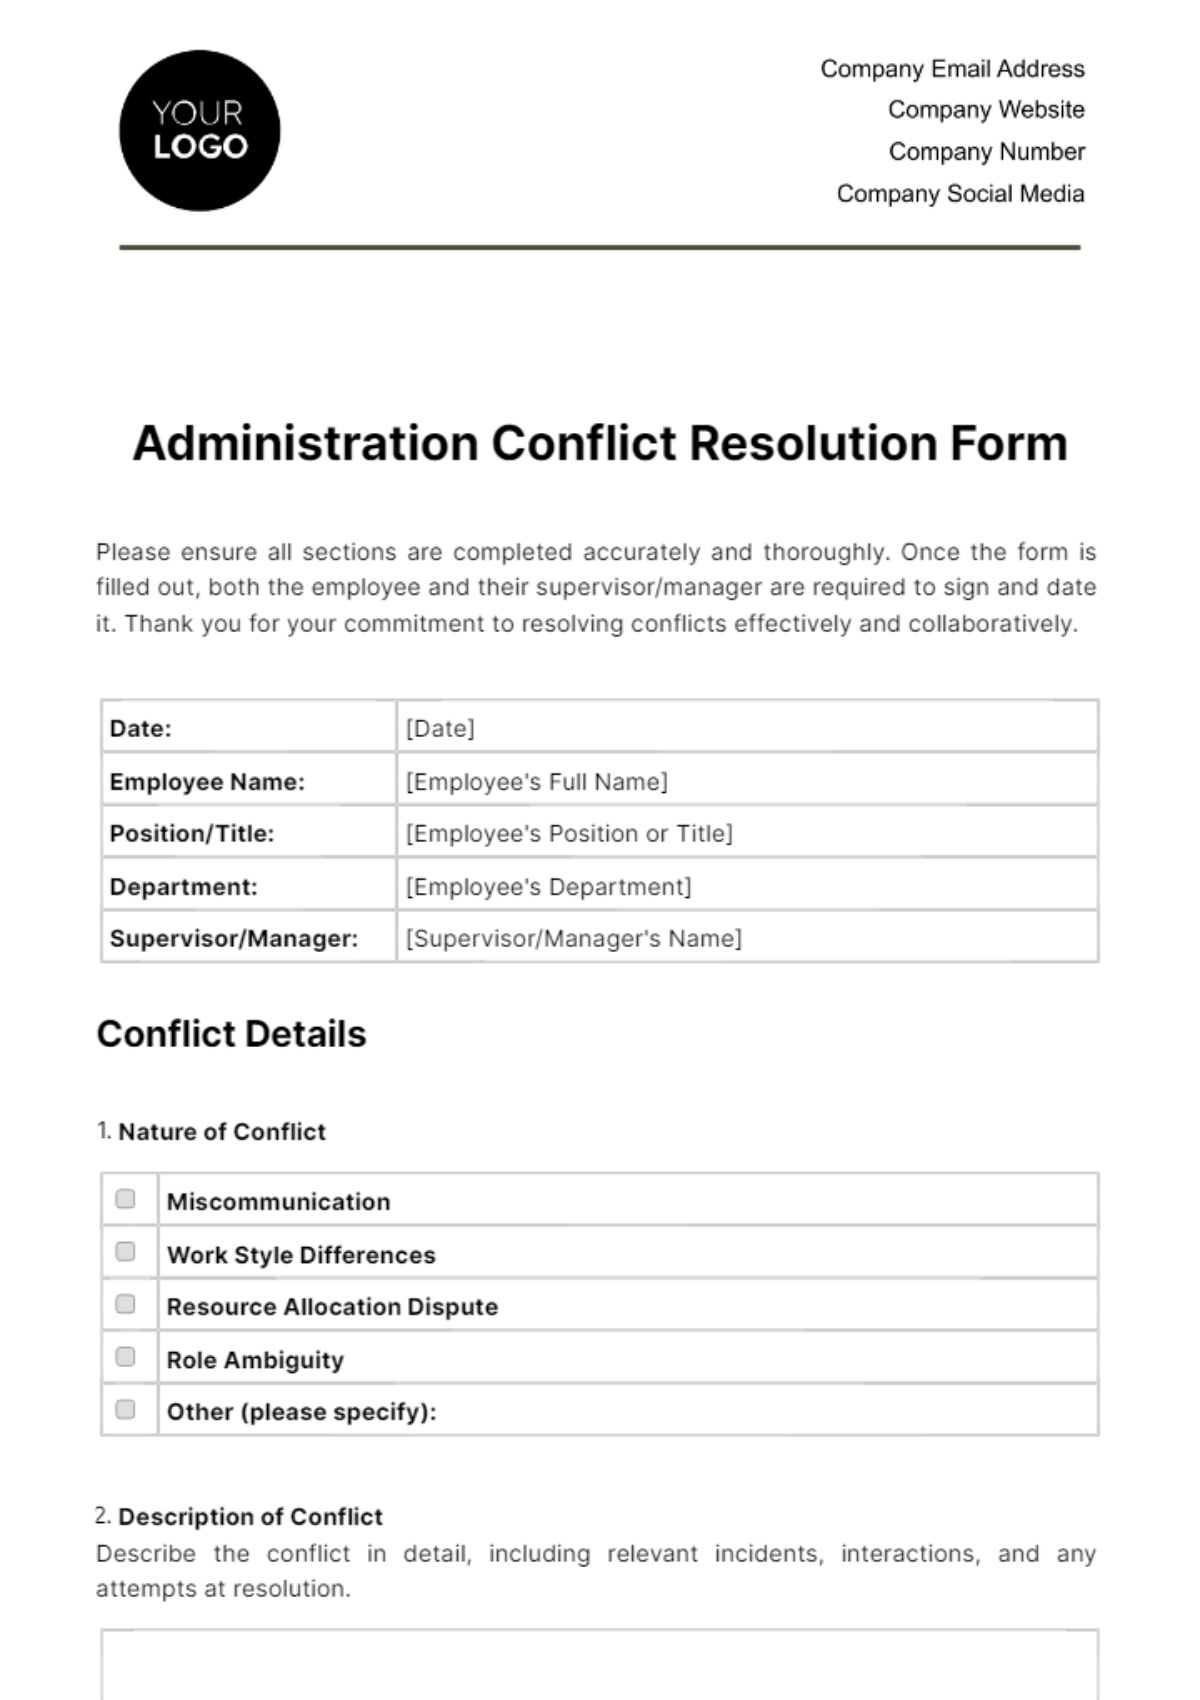 Free Administration Conflict Resolution Form Template